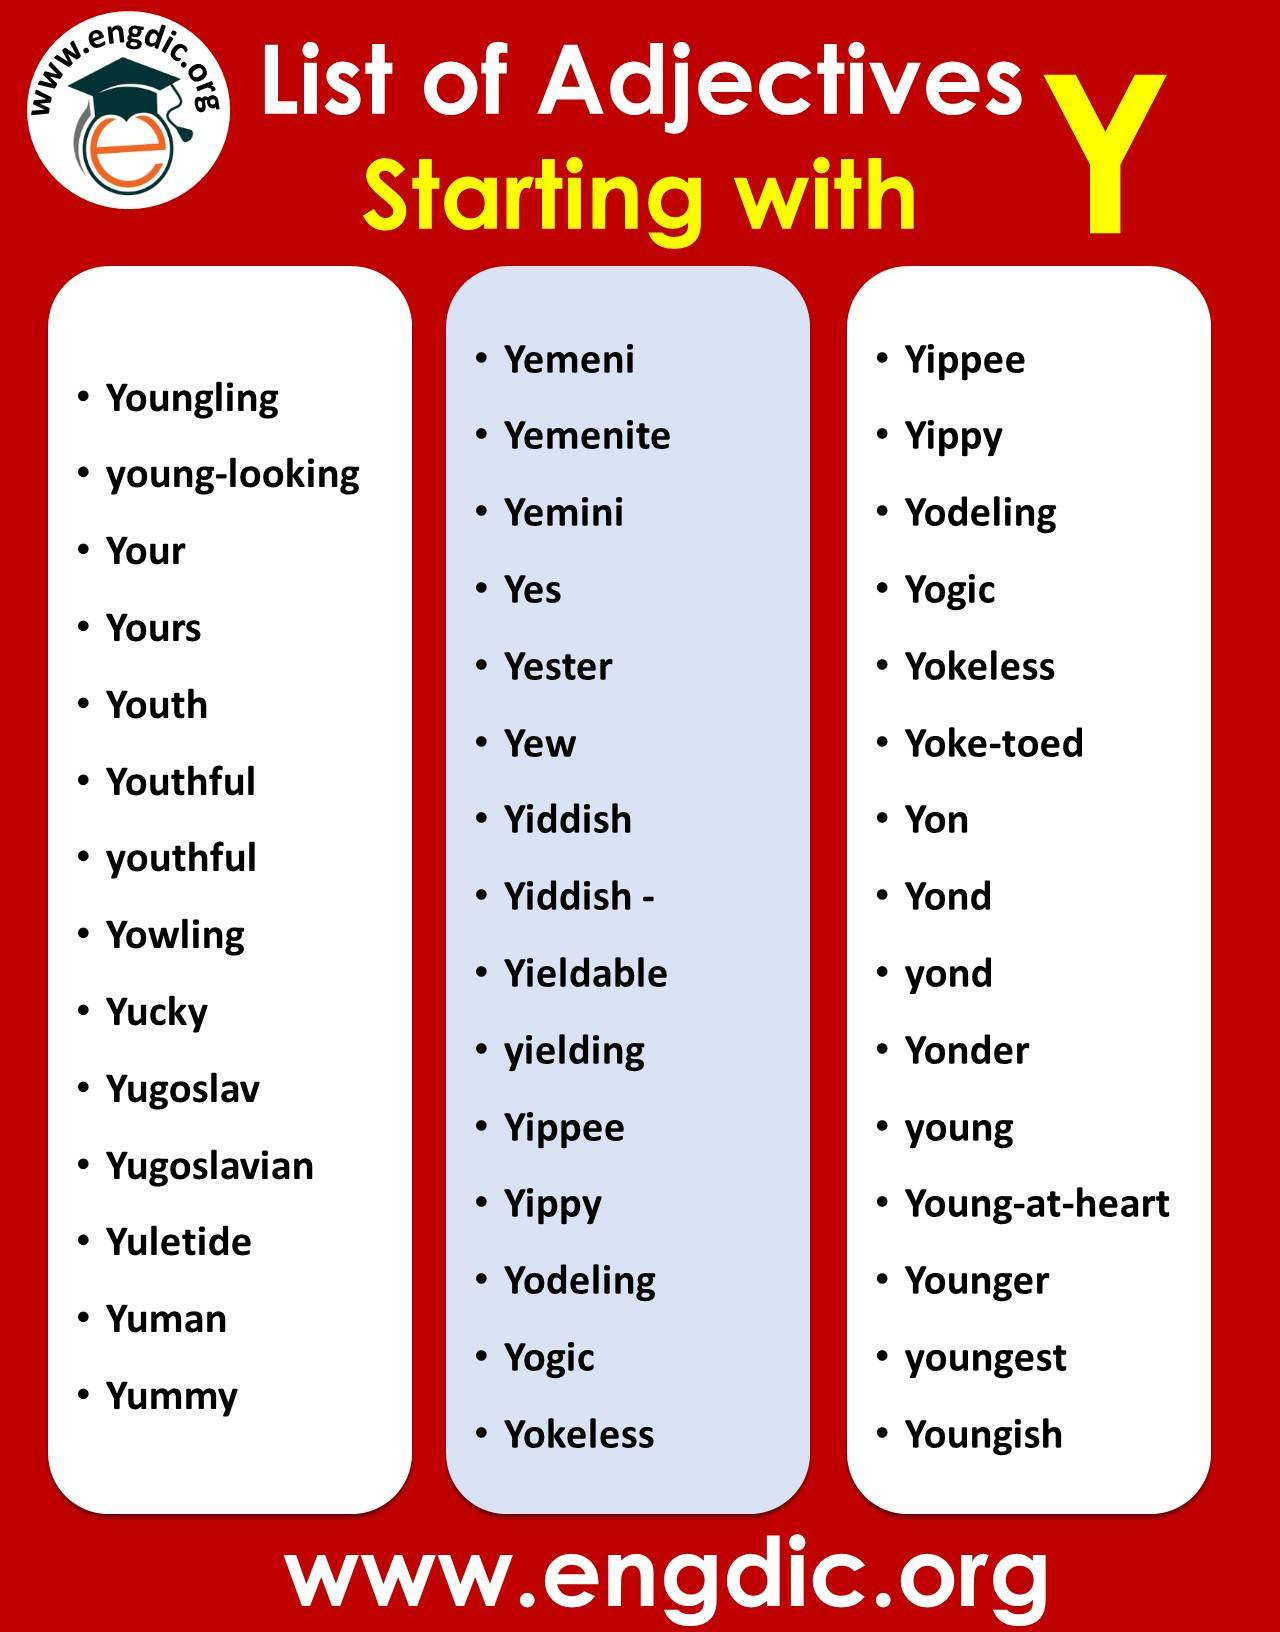 adjectives starting with y to describe a person